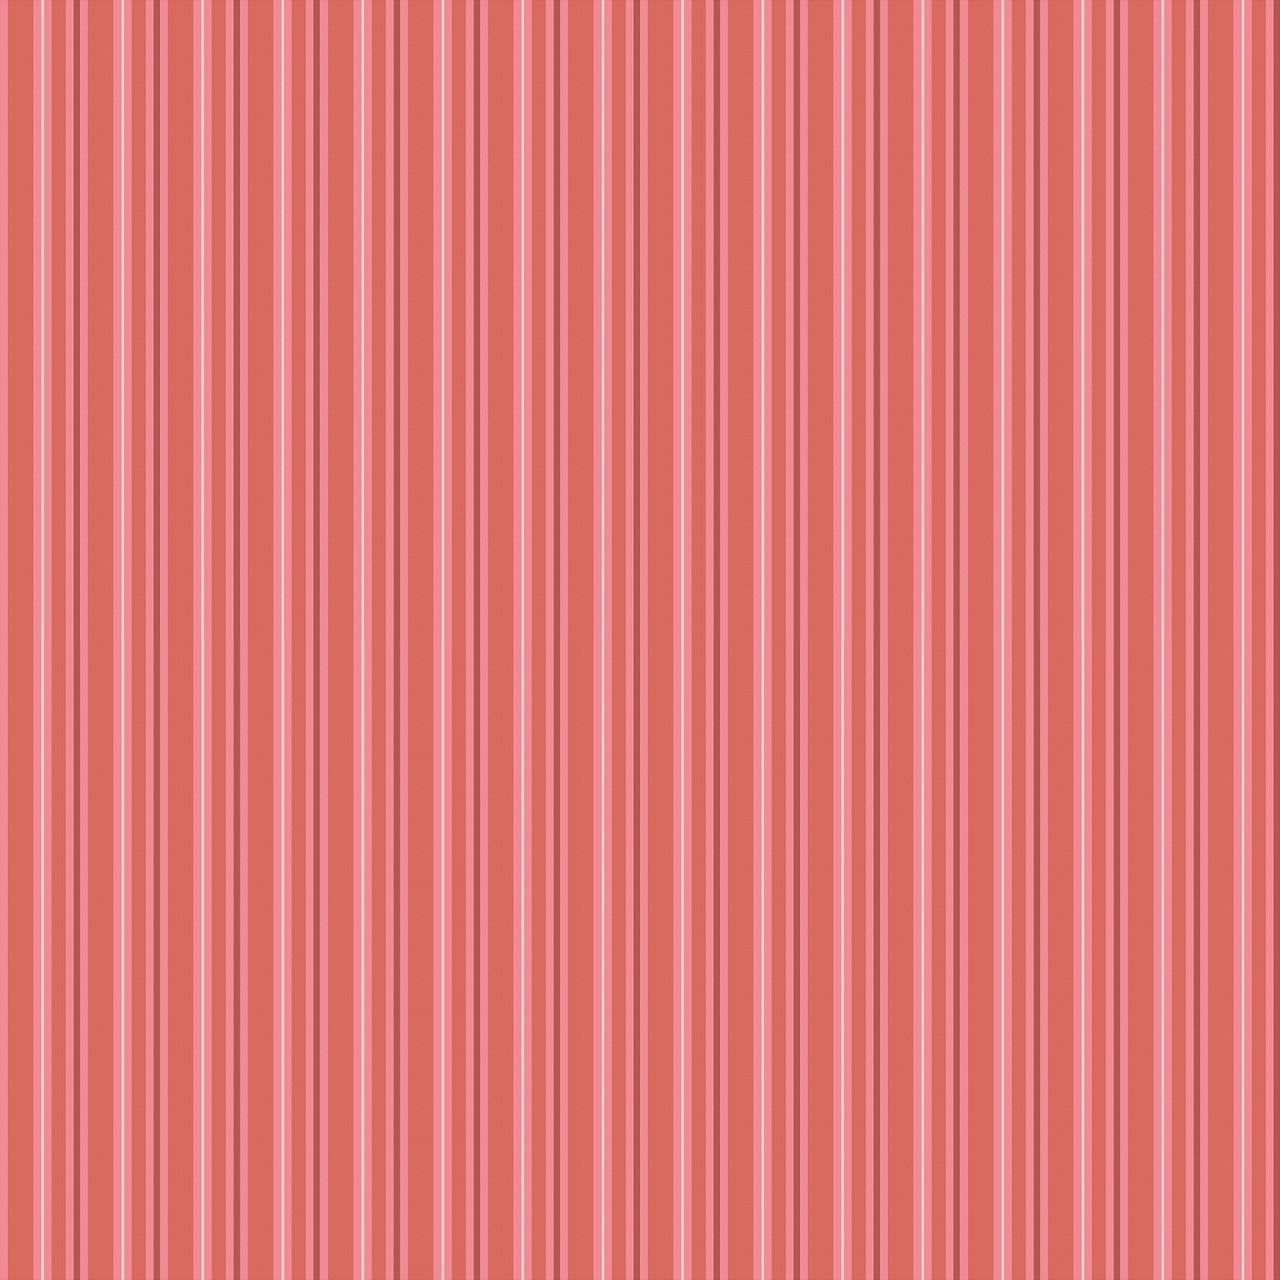 a red and pink striped background, inspired by Katsushika Ōi, corduroy, watermeloncore, [ [ soft ] ], graphic 4 5